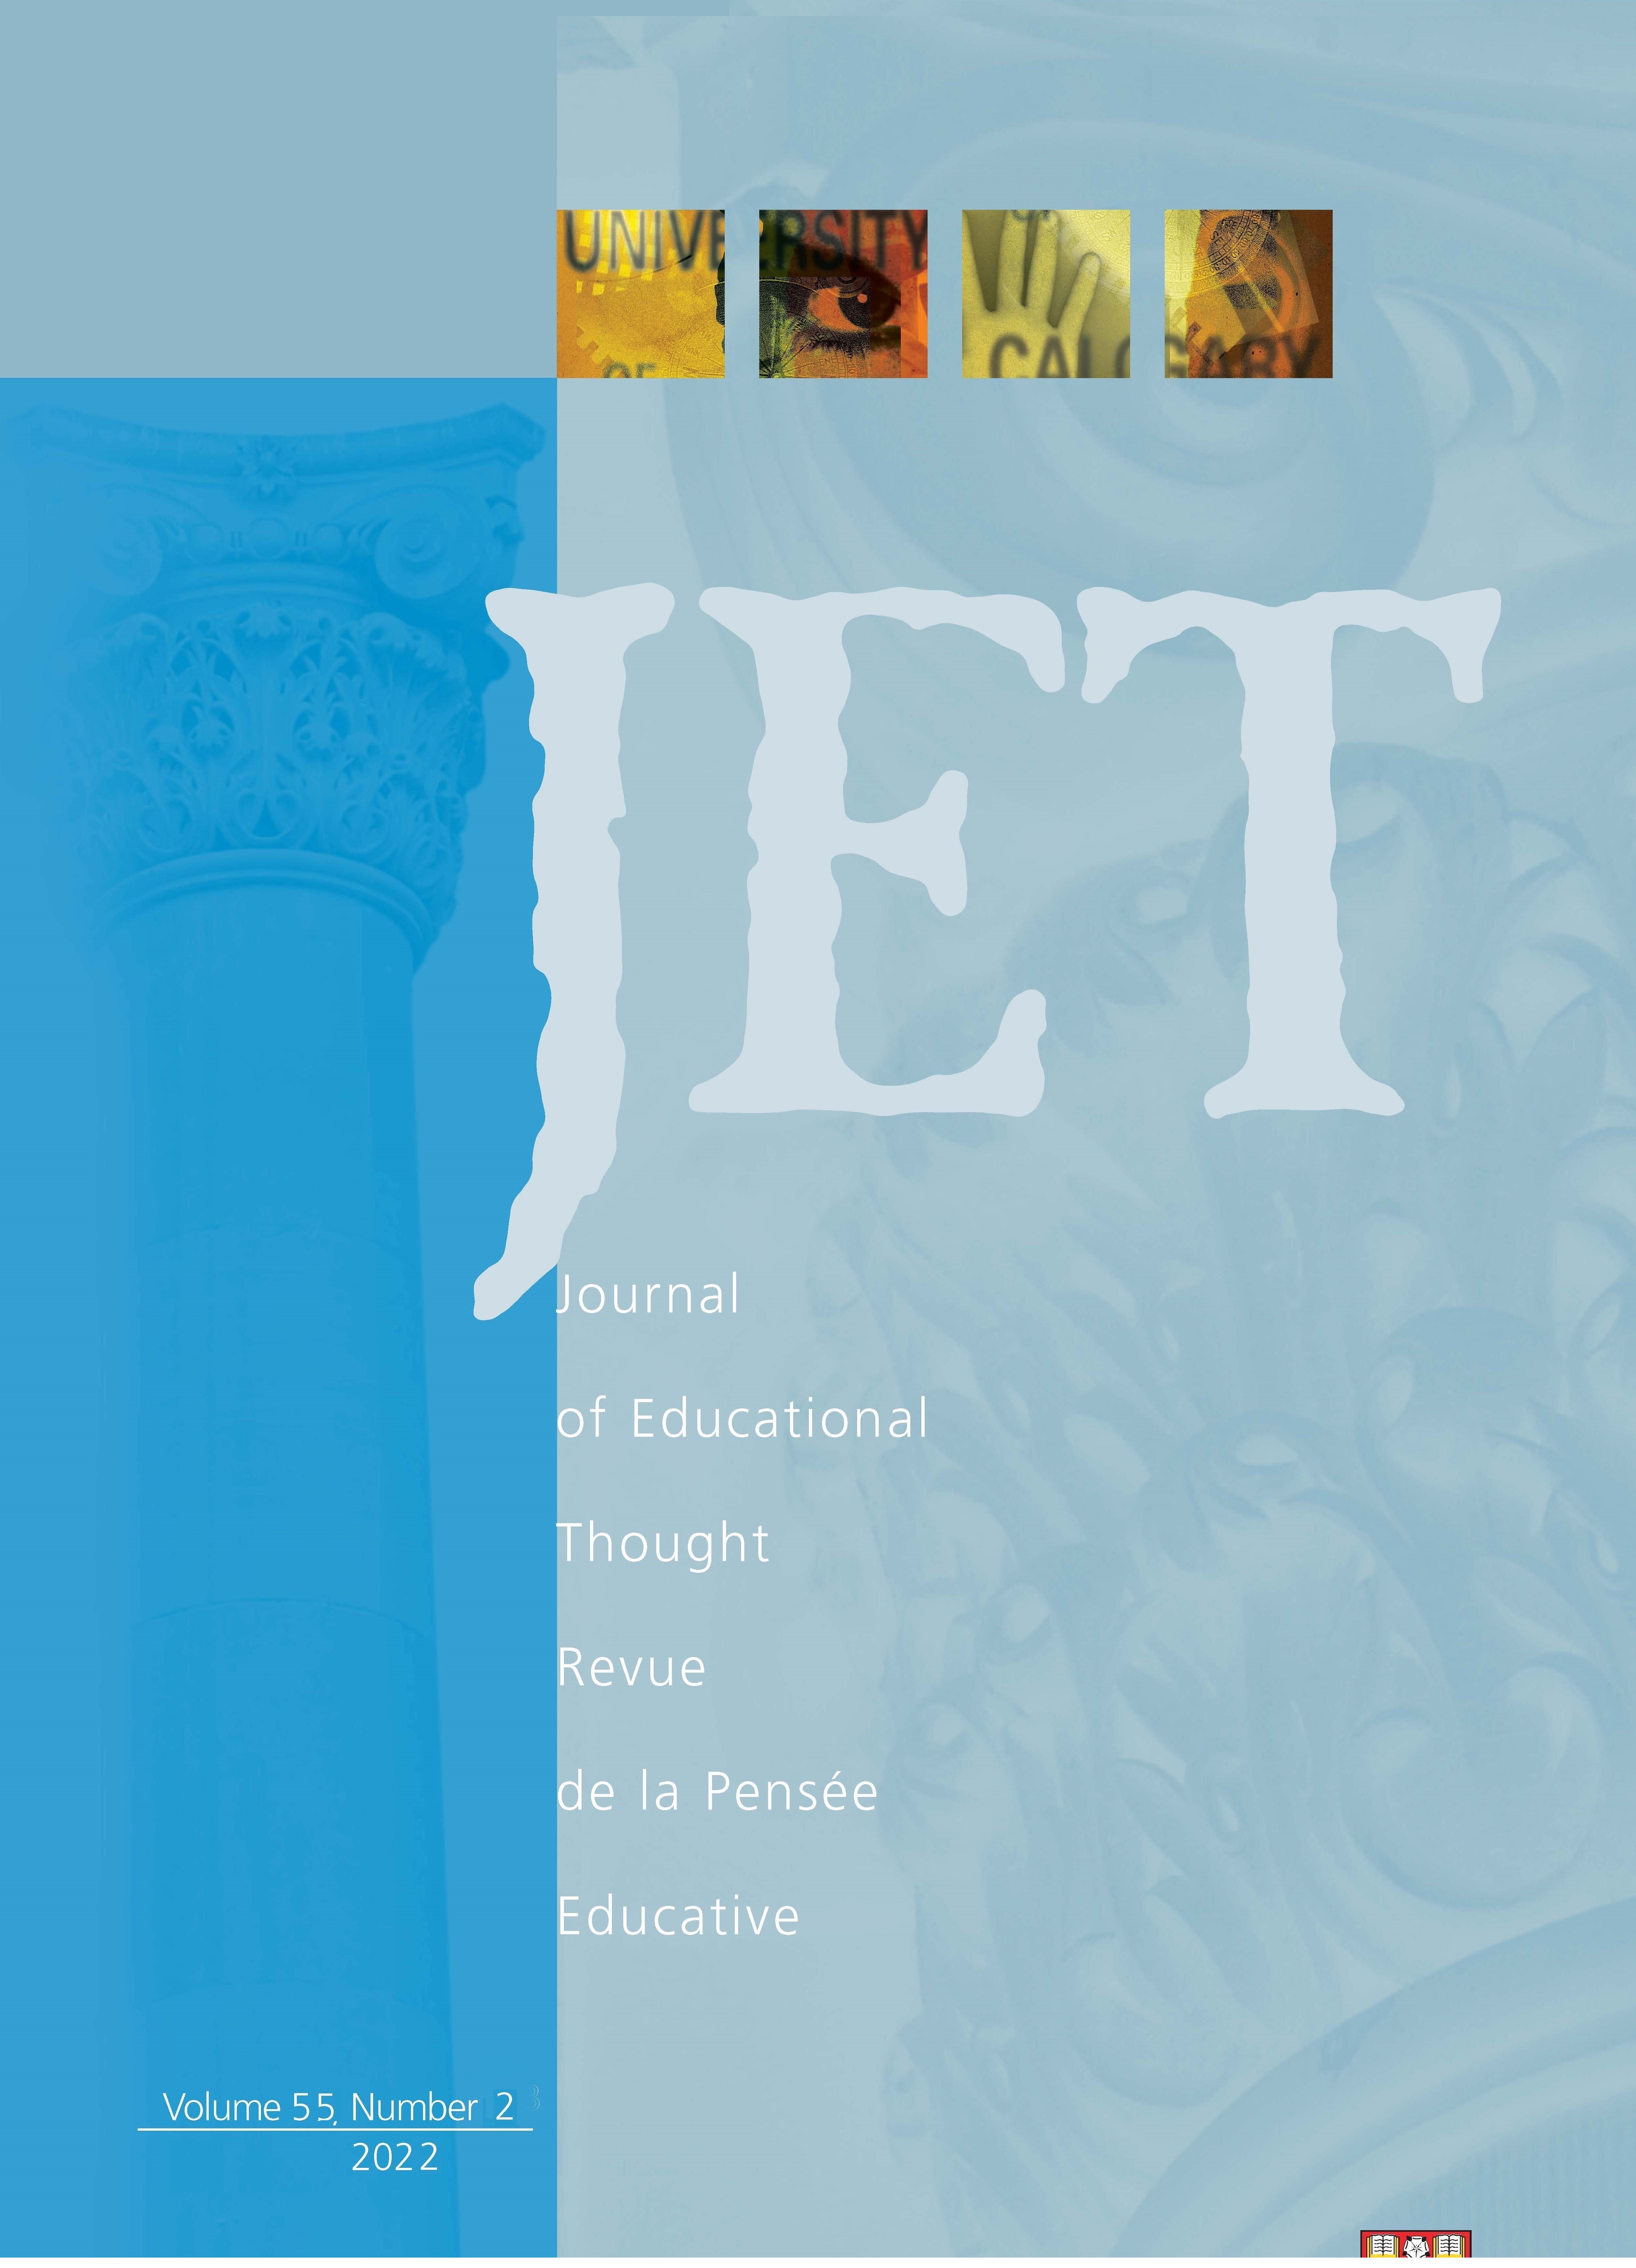 					View Vol. 55 No. 2 (2022): Journal of Educational Thought
				